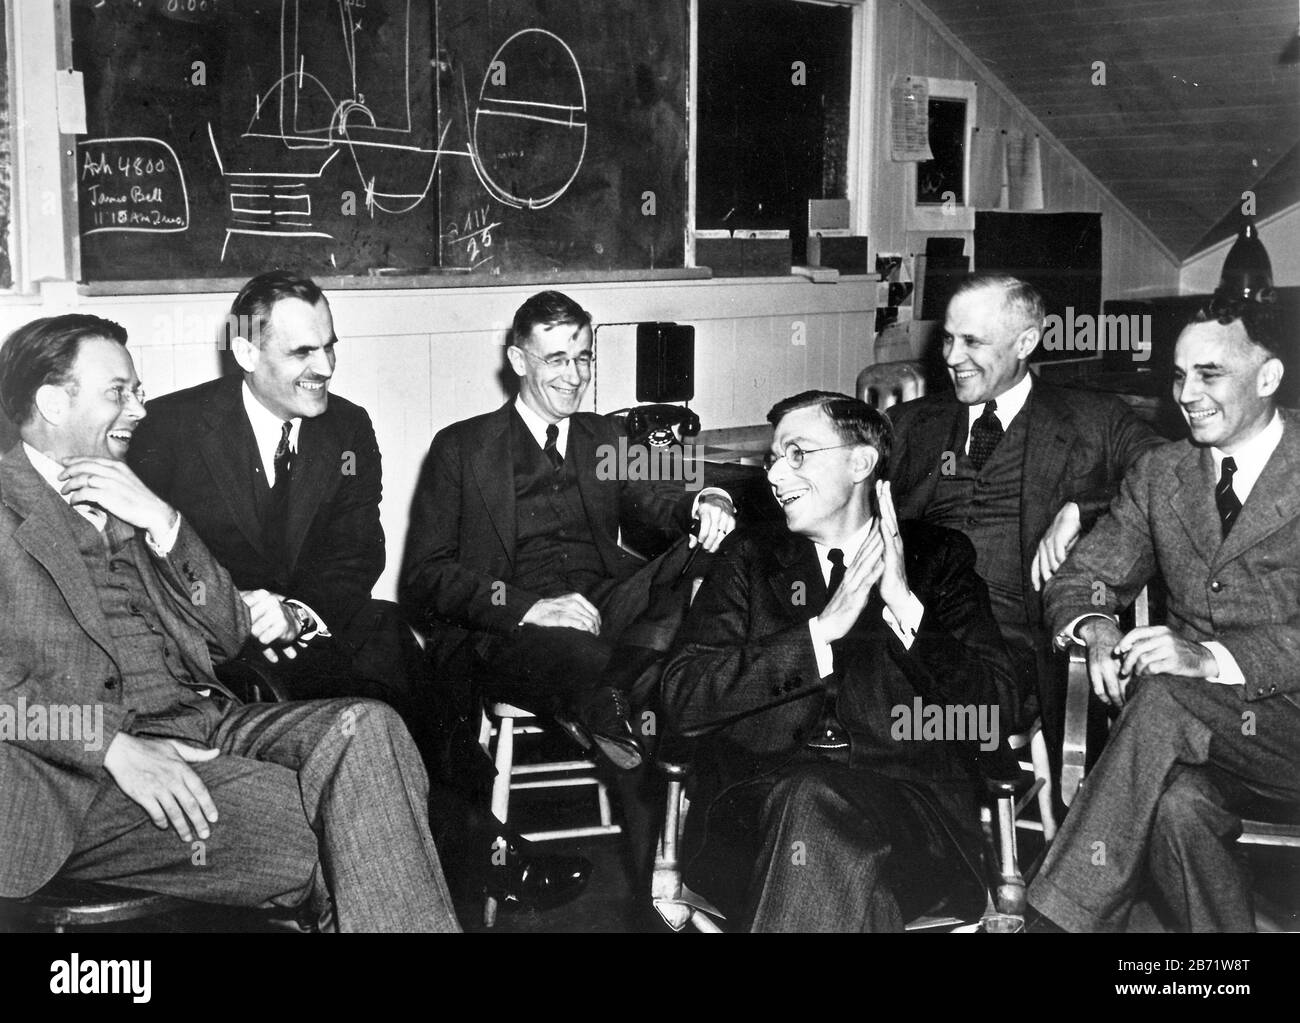 Meeting at Berkeley in 1940 concerning the planned 184-inch (4.67 m) cyclotron (seen on the blackboard): Lawrence, Arthur Compton, Vannevar Bush, James B. Conant, Karl T. Compton, and Alfred Lee Loomis Group photo of E. O. Lawrence, A. H. Compton, V. Bush, J. B. Conant, K. Compton, and A. Loomis in March 1940 at UC Berkeley meeting Stock Photo